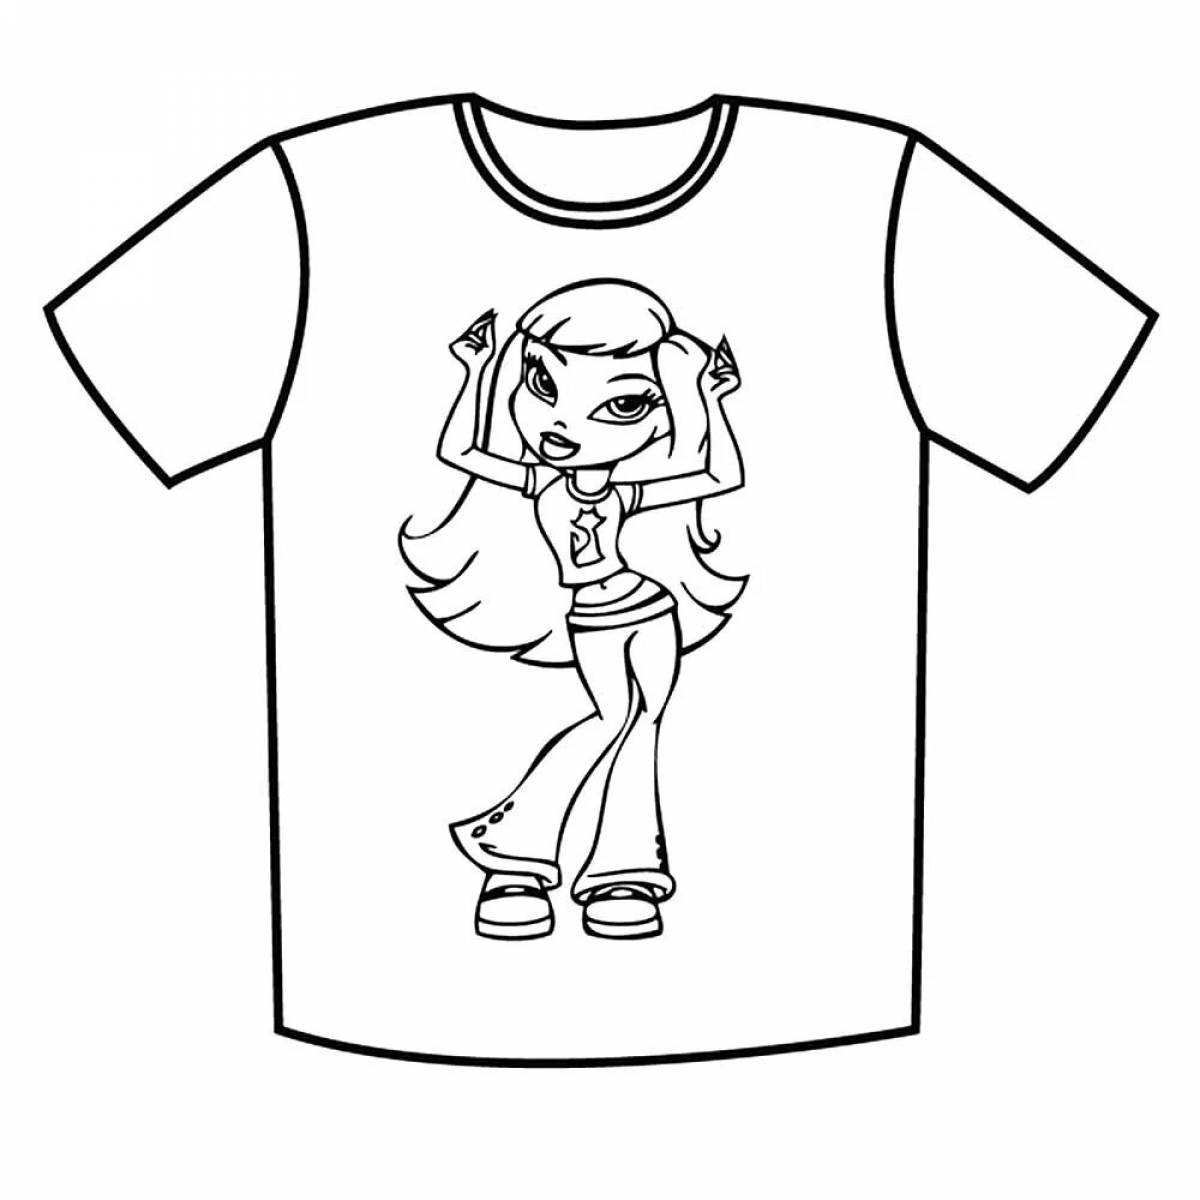 Colorful t-shirt coloring page for kids to develop self-confidence